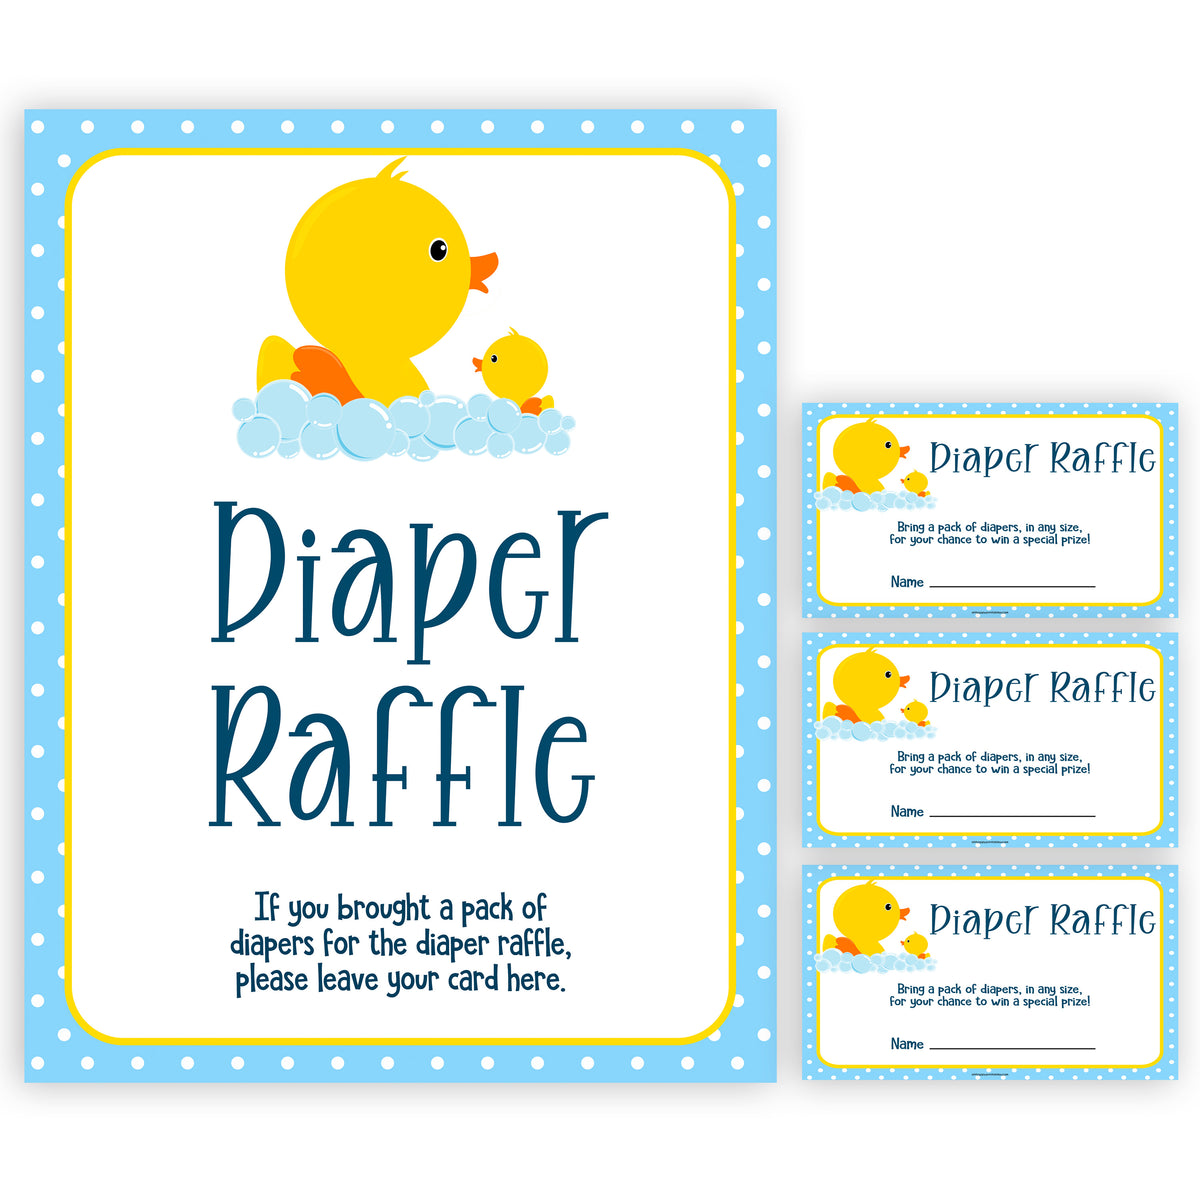 diaper-raffle-game-rubber-ducky-printable-baby-games-ohhappyprintables